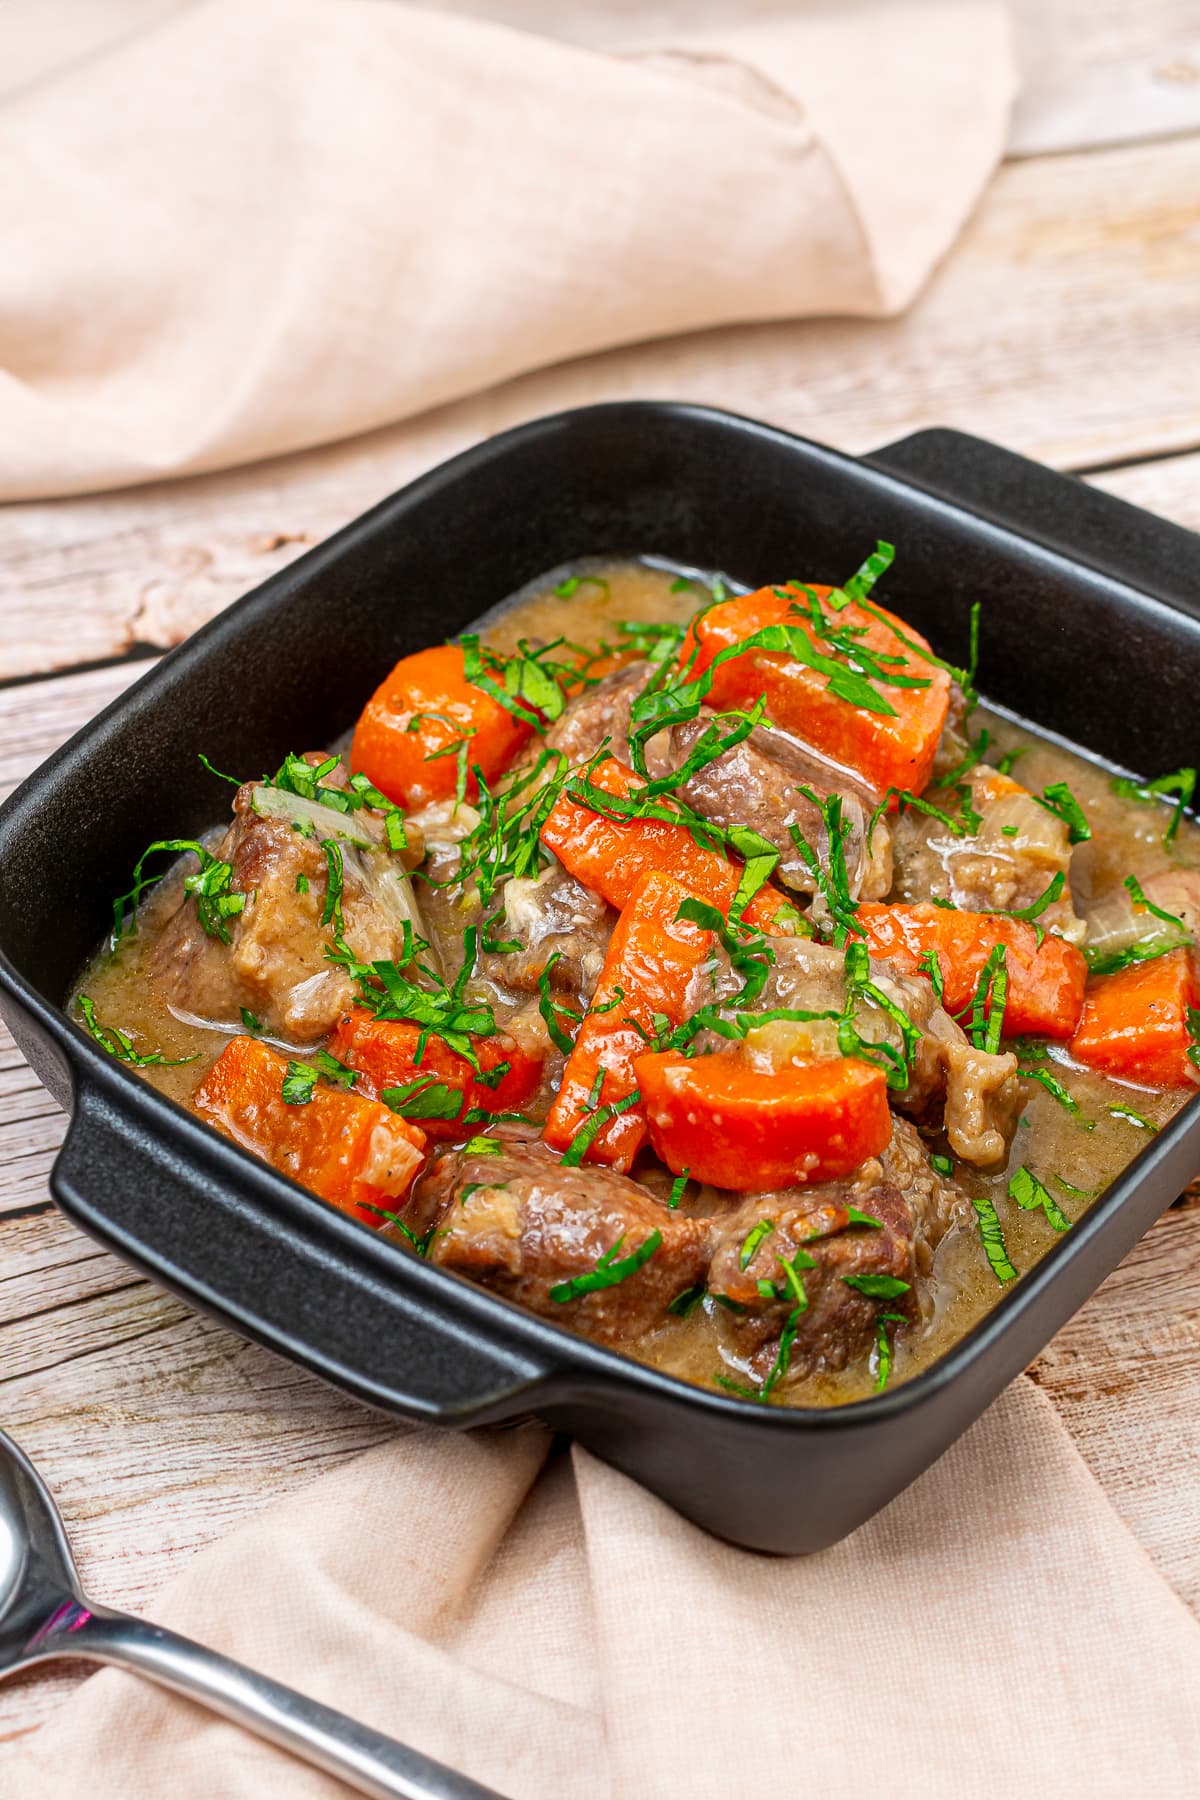 Beef stew with carrots and chopped parsley in a squared black plate on a wooden surface.